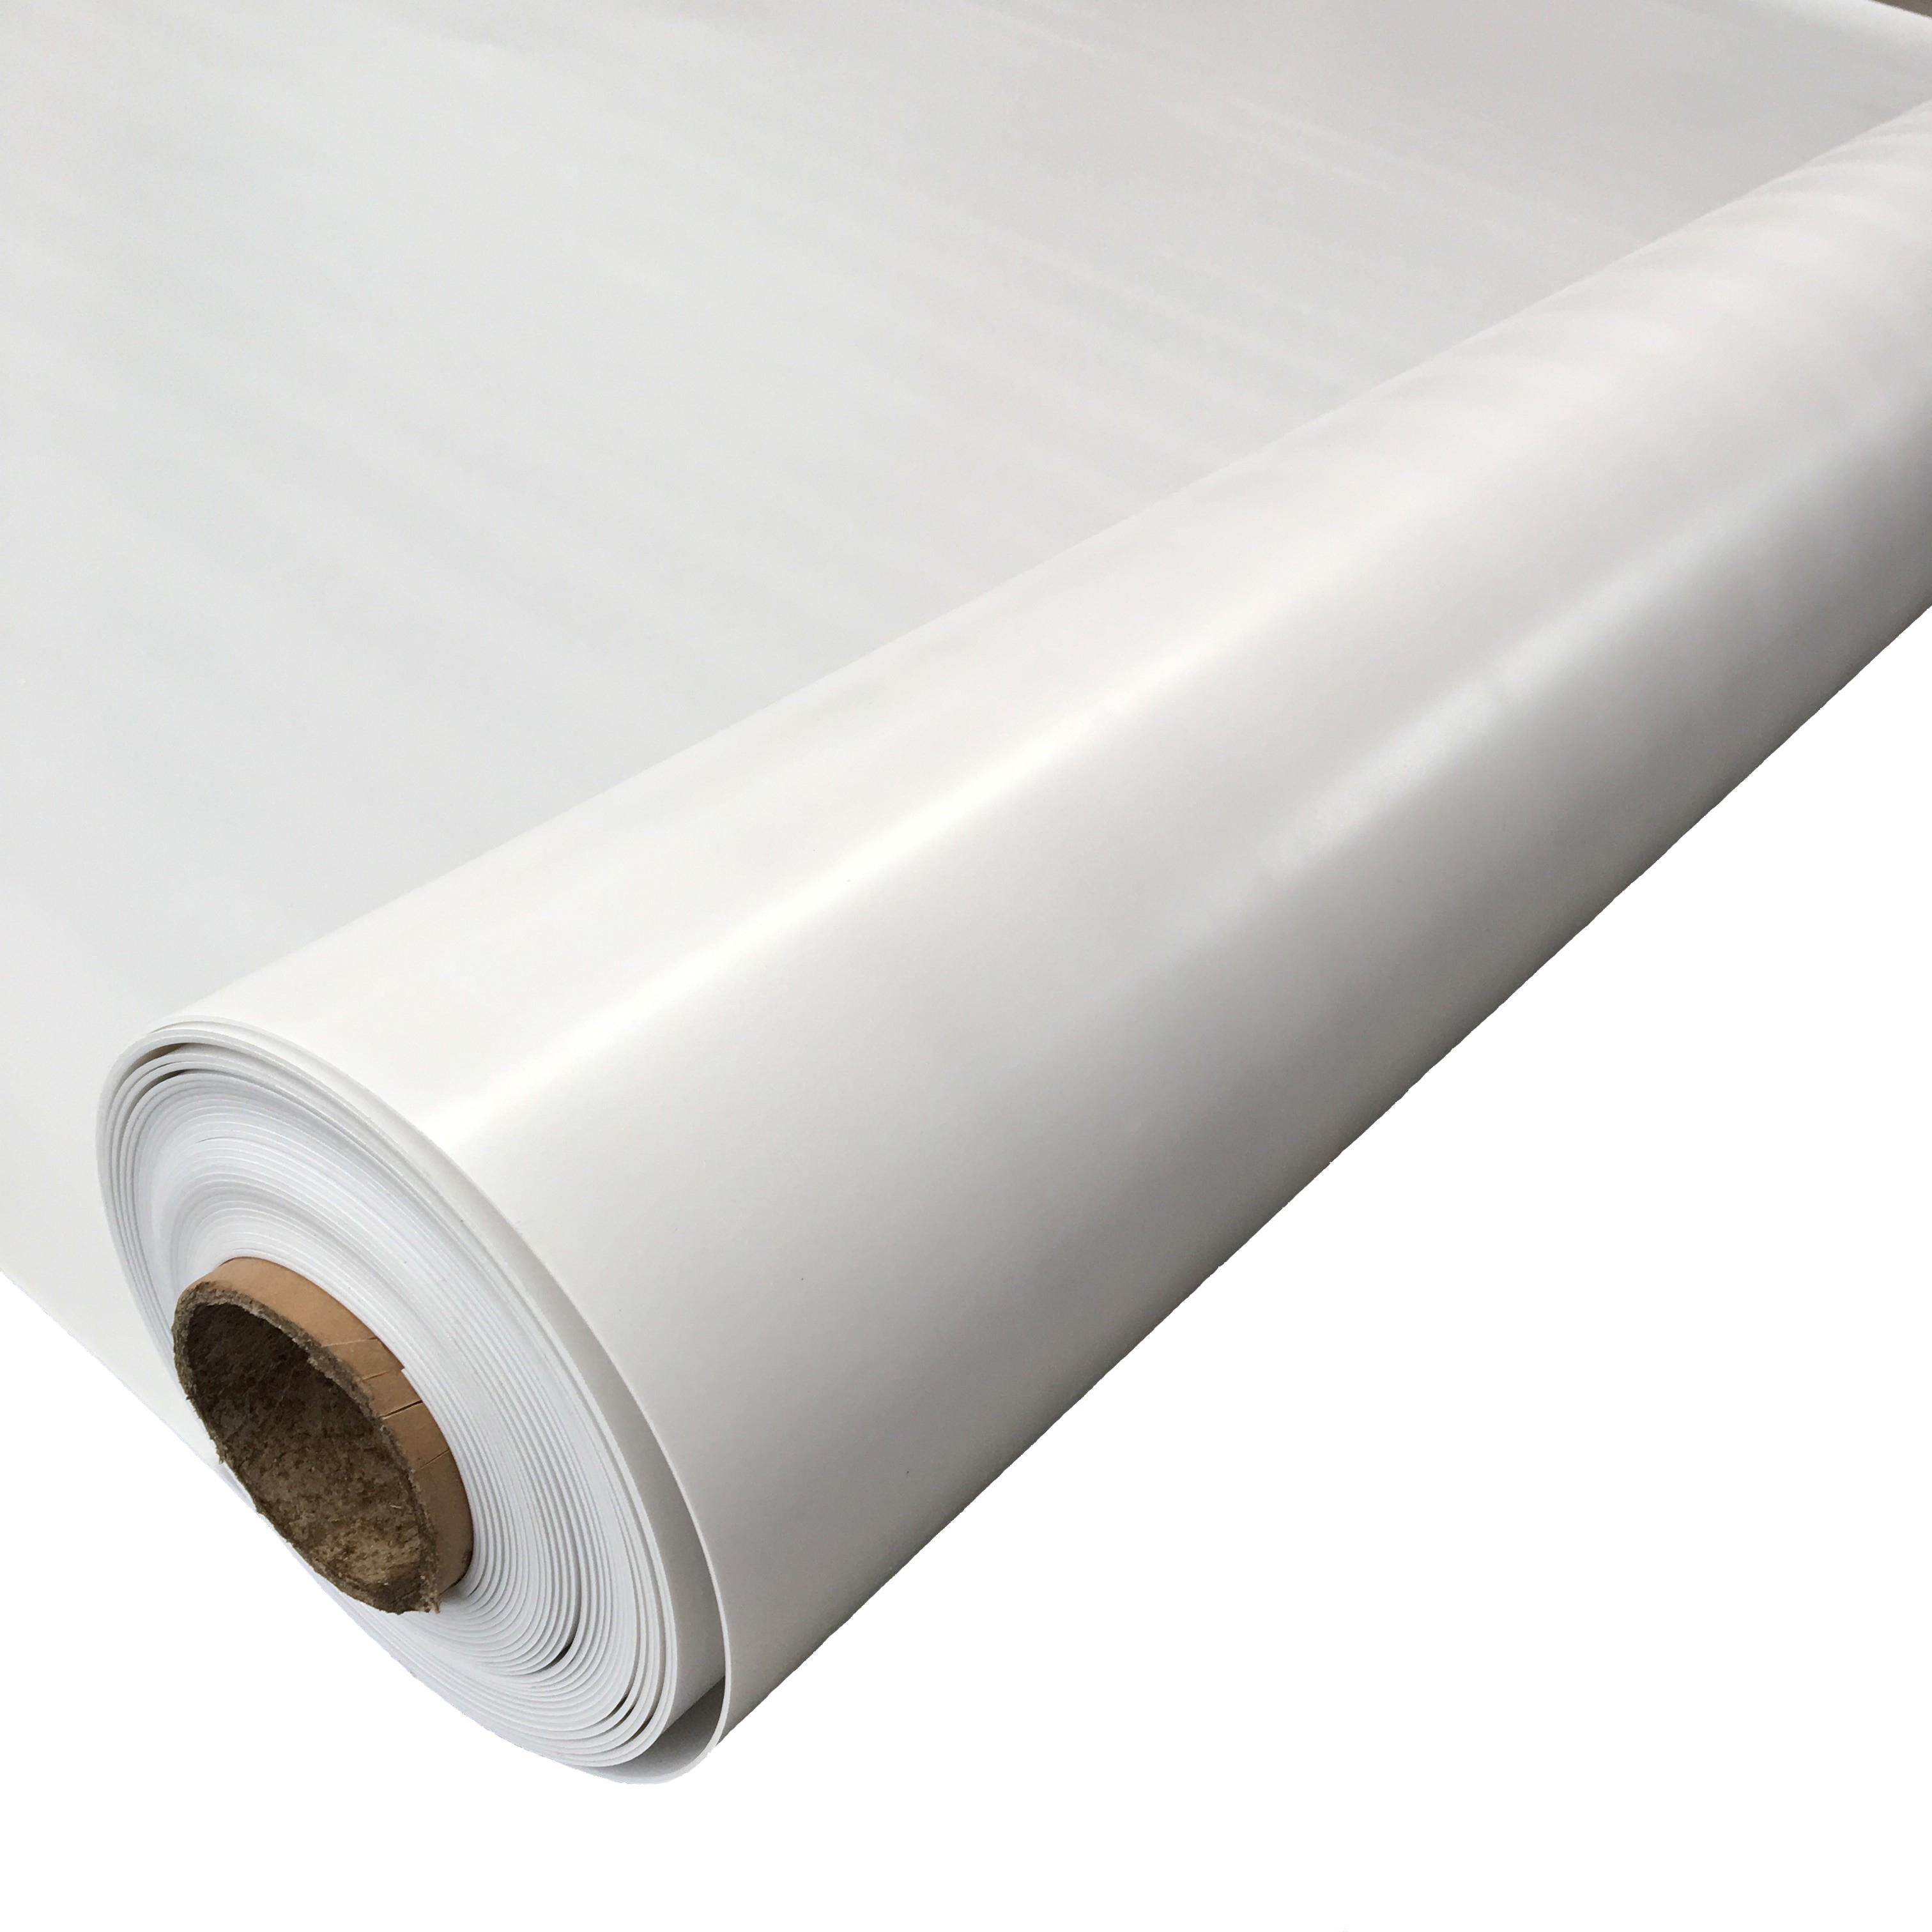 Single Ply Roofing Tpo Waterproof Membrane Roll For Roof